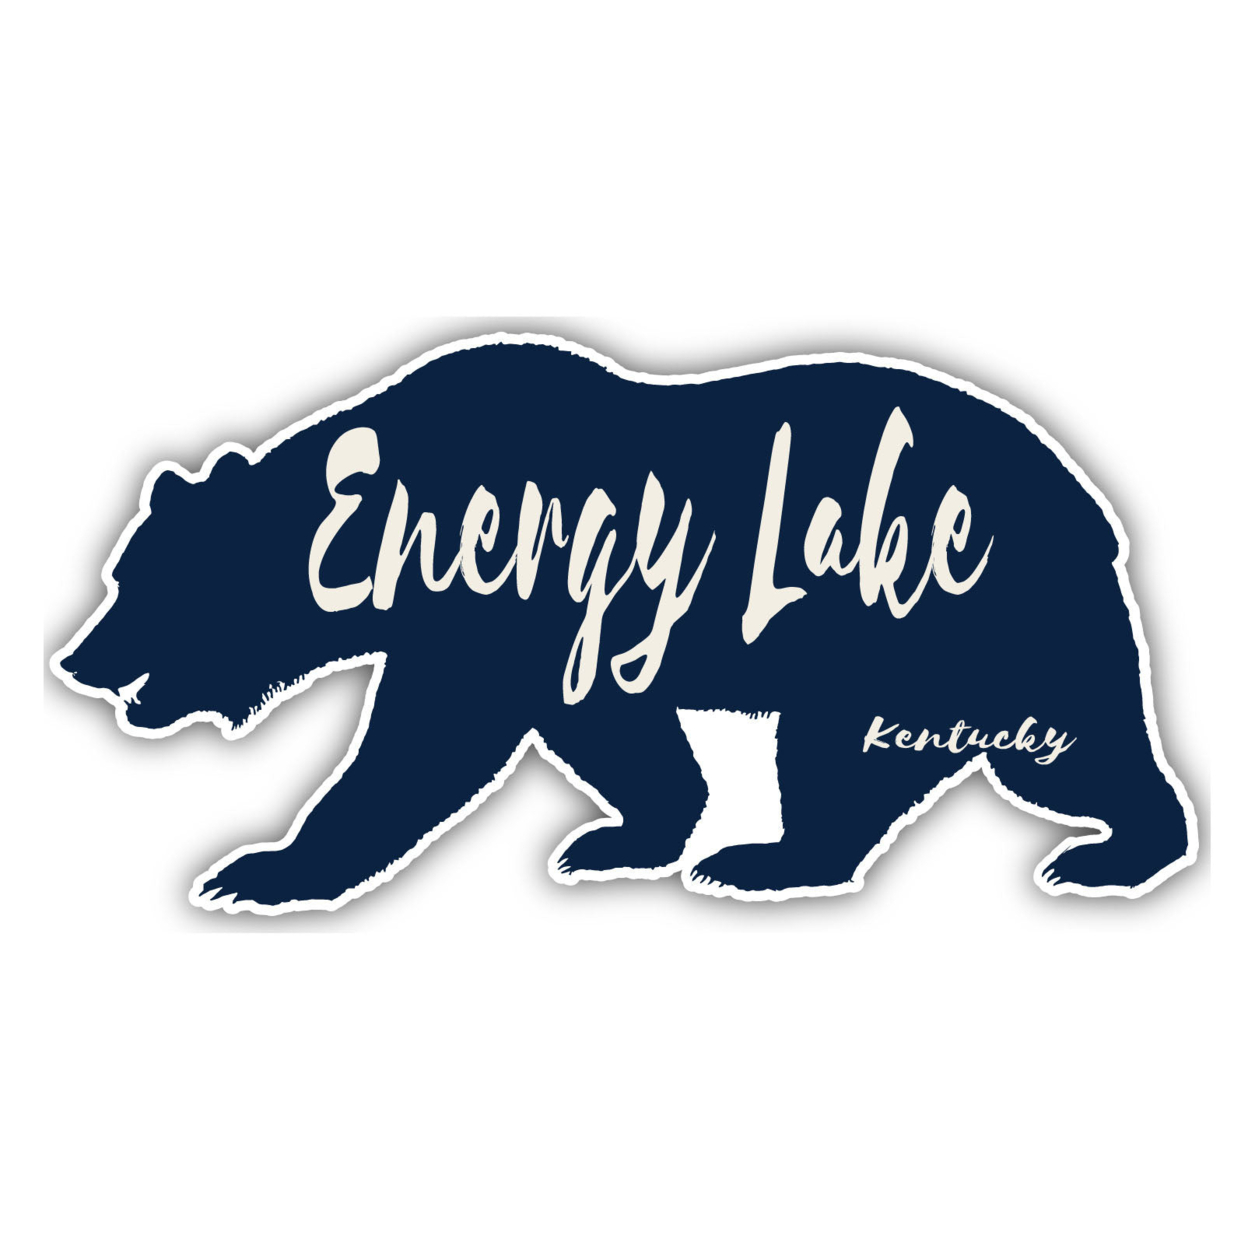 Energy Lake Kentucky Souvenir Decorative Stickers (Choose Theme And Size) - 4-Pack, 8-Inch, Bear